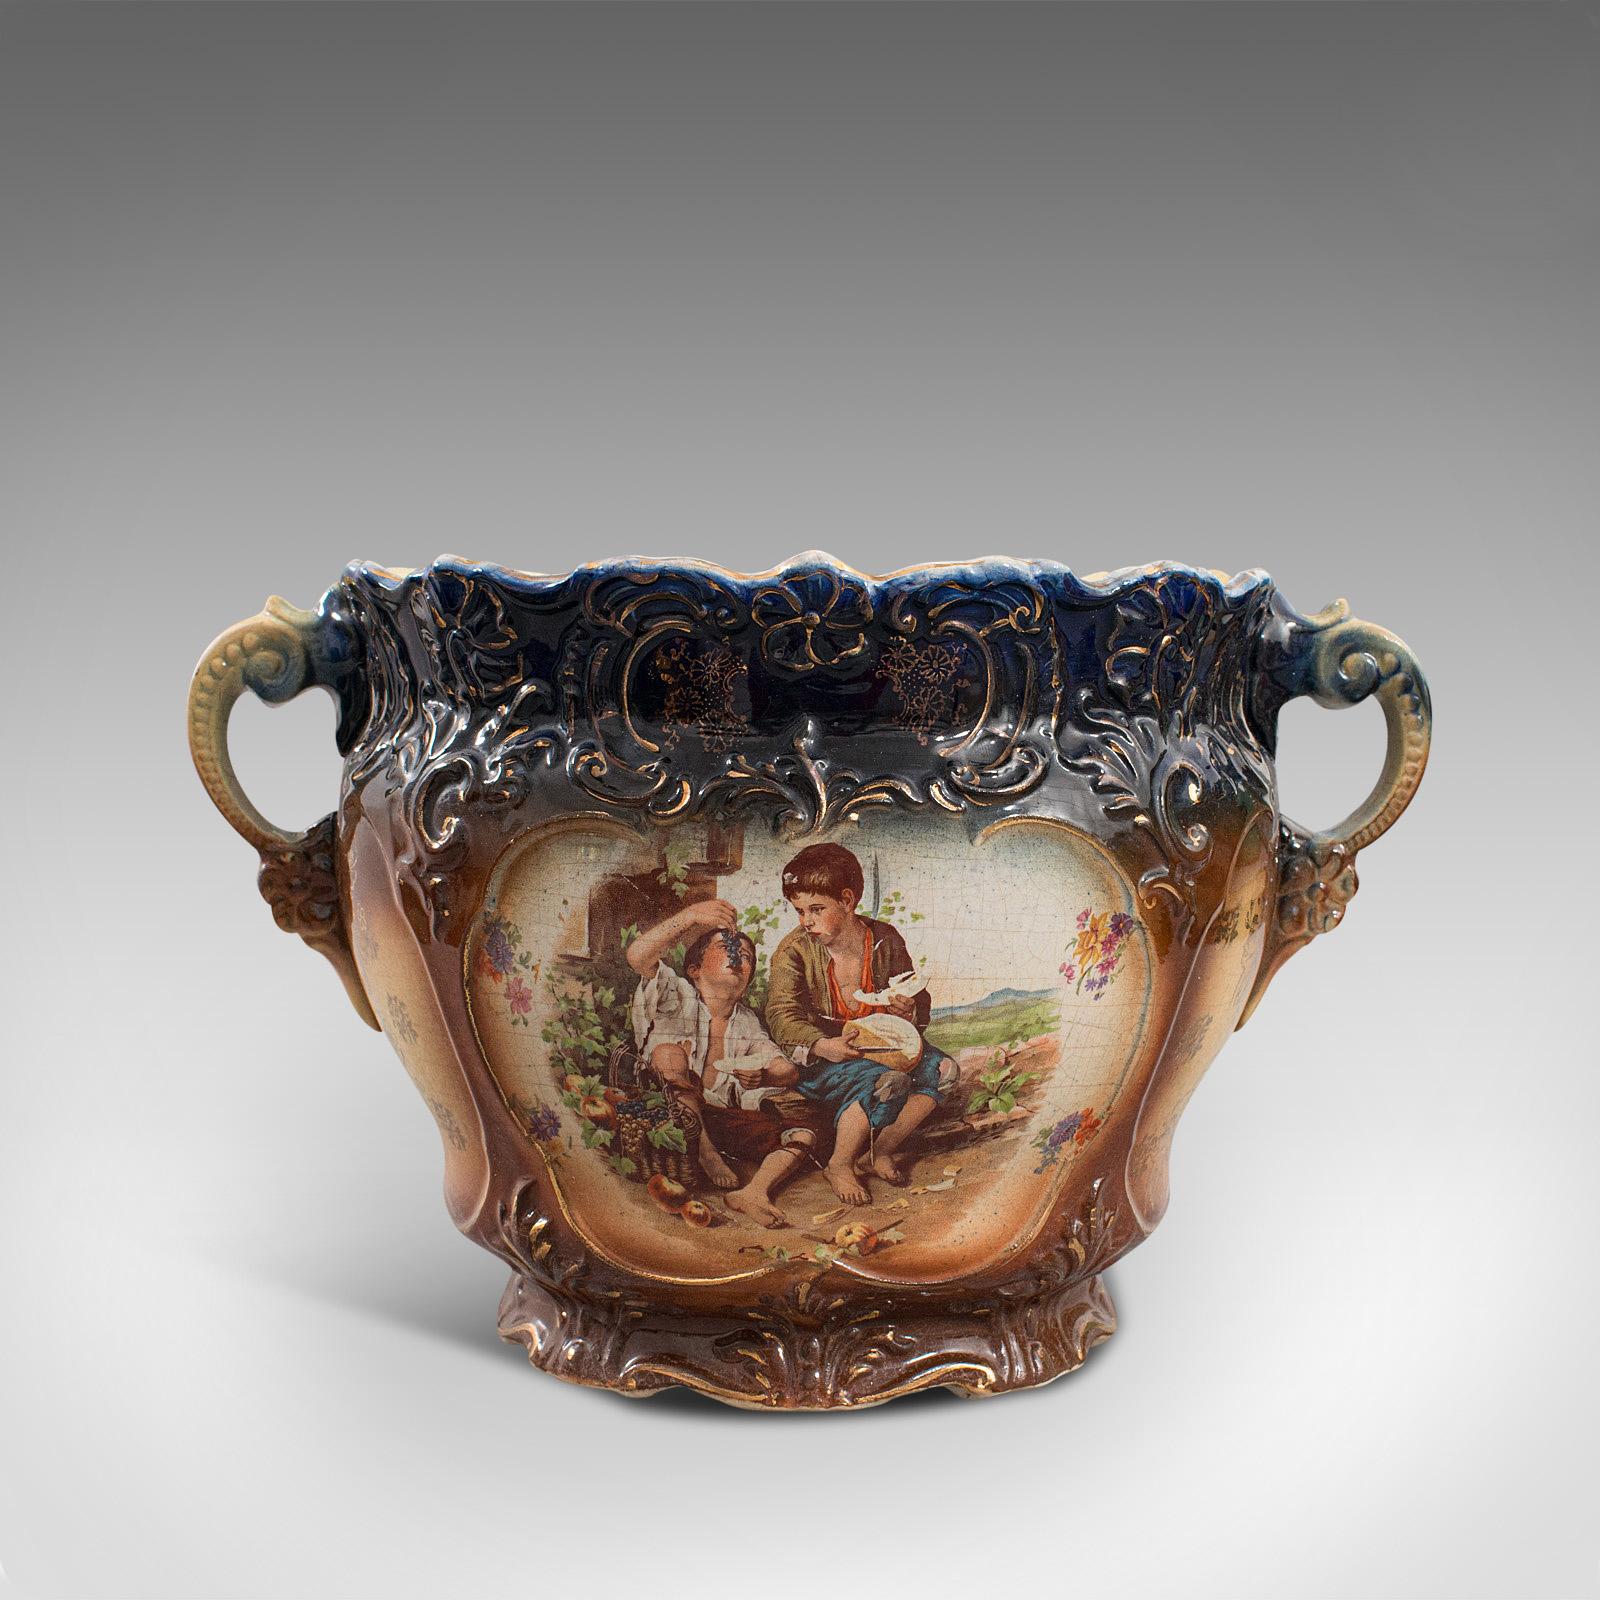 This is an ornate antique decorative planter. An English, ceramic jardiniere or bowl, dating to the Edwardian period, circa 1910.

Elaborate painted detail draws the eye
Displaying a desirable aged patina - characterful crazing beneath the